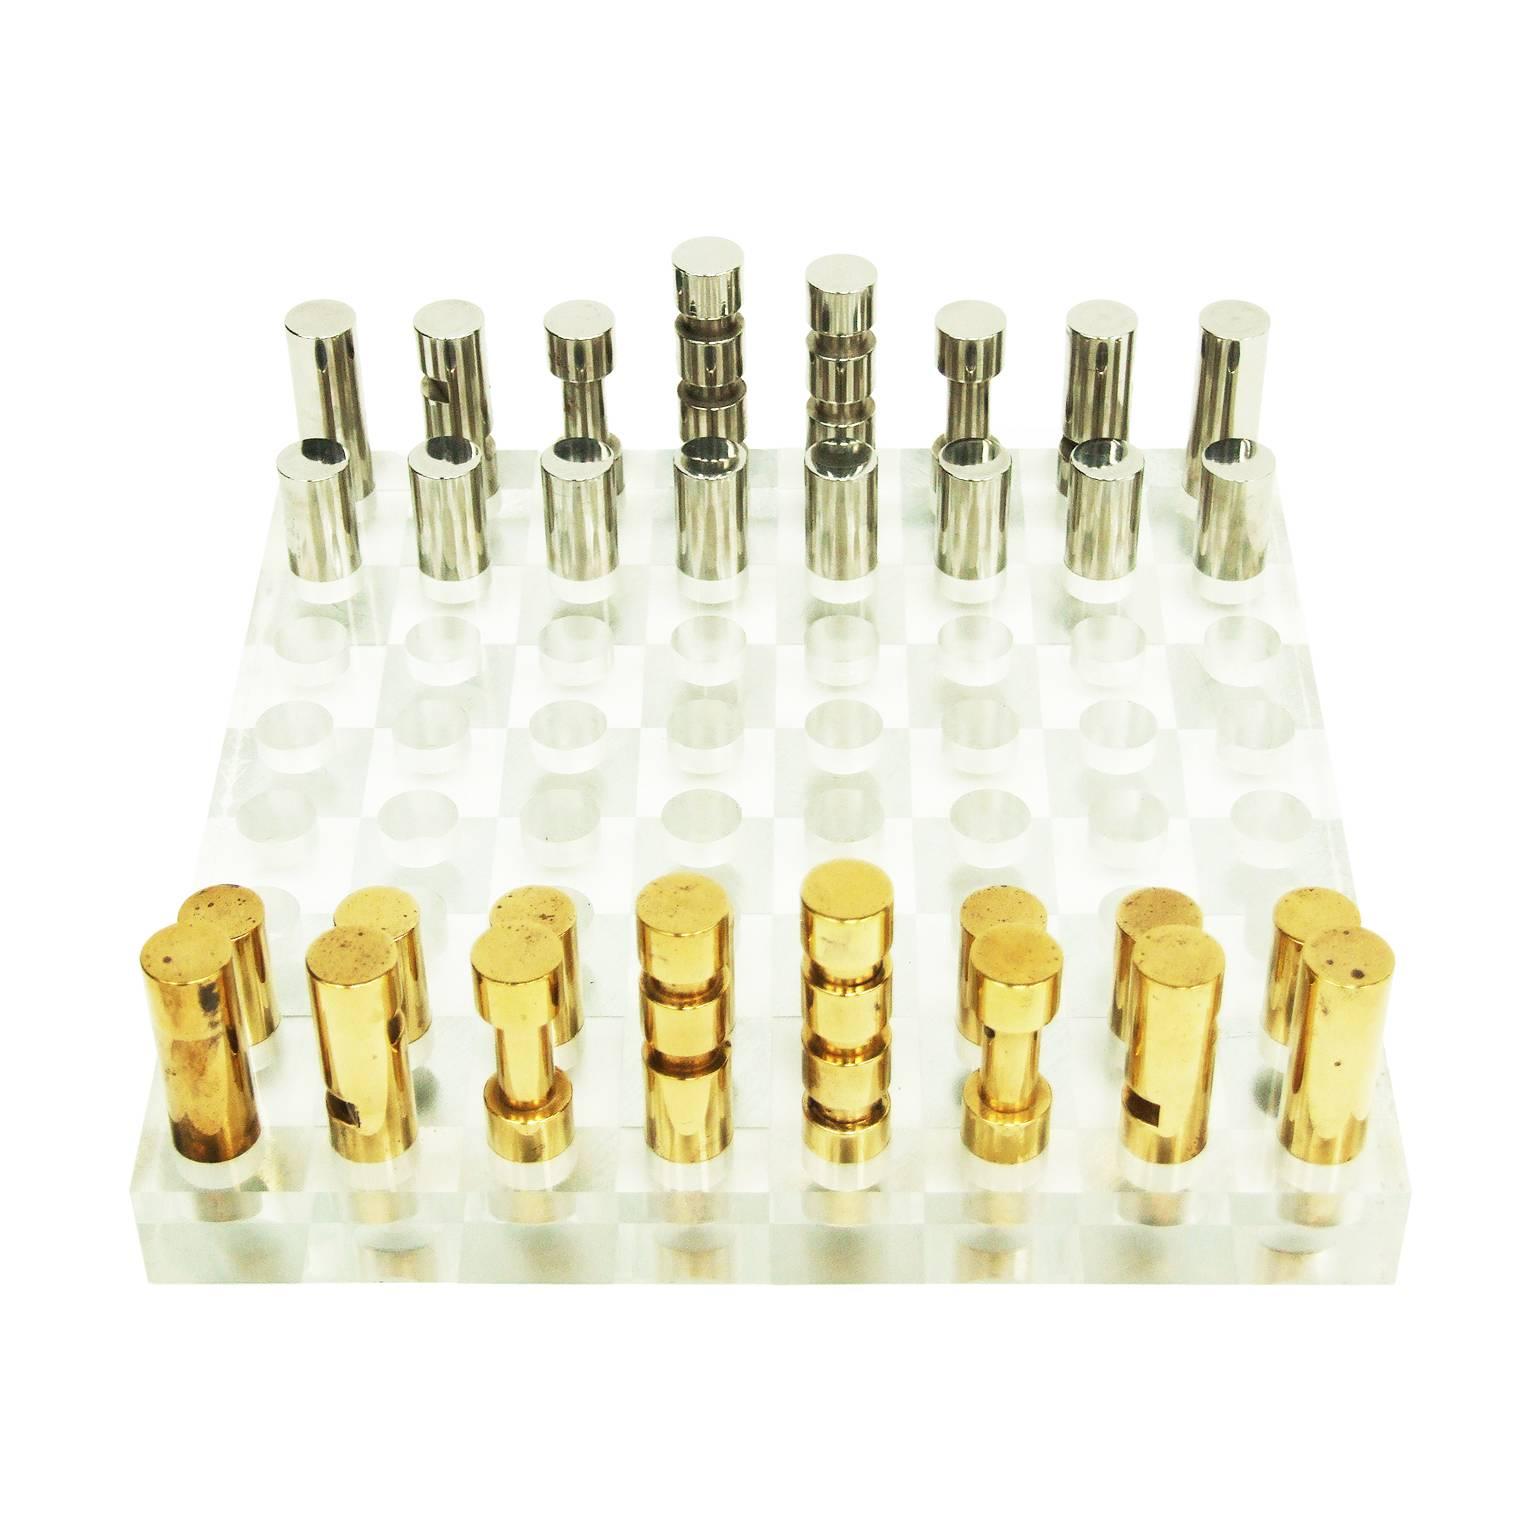 1970s chess set designed and manufactured in France.

Solid polished brass and steel cylindrical chess pieces.

Lucite chessboard.

Measures: H 6cm x L 20cm x W 20cm.